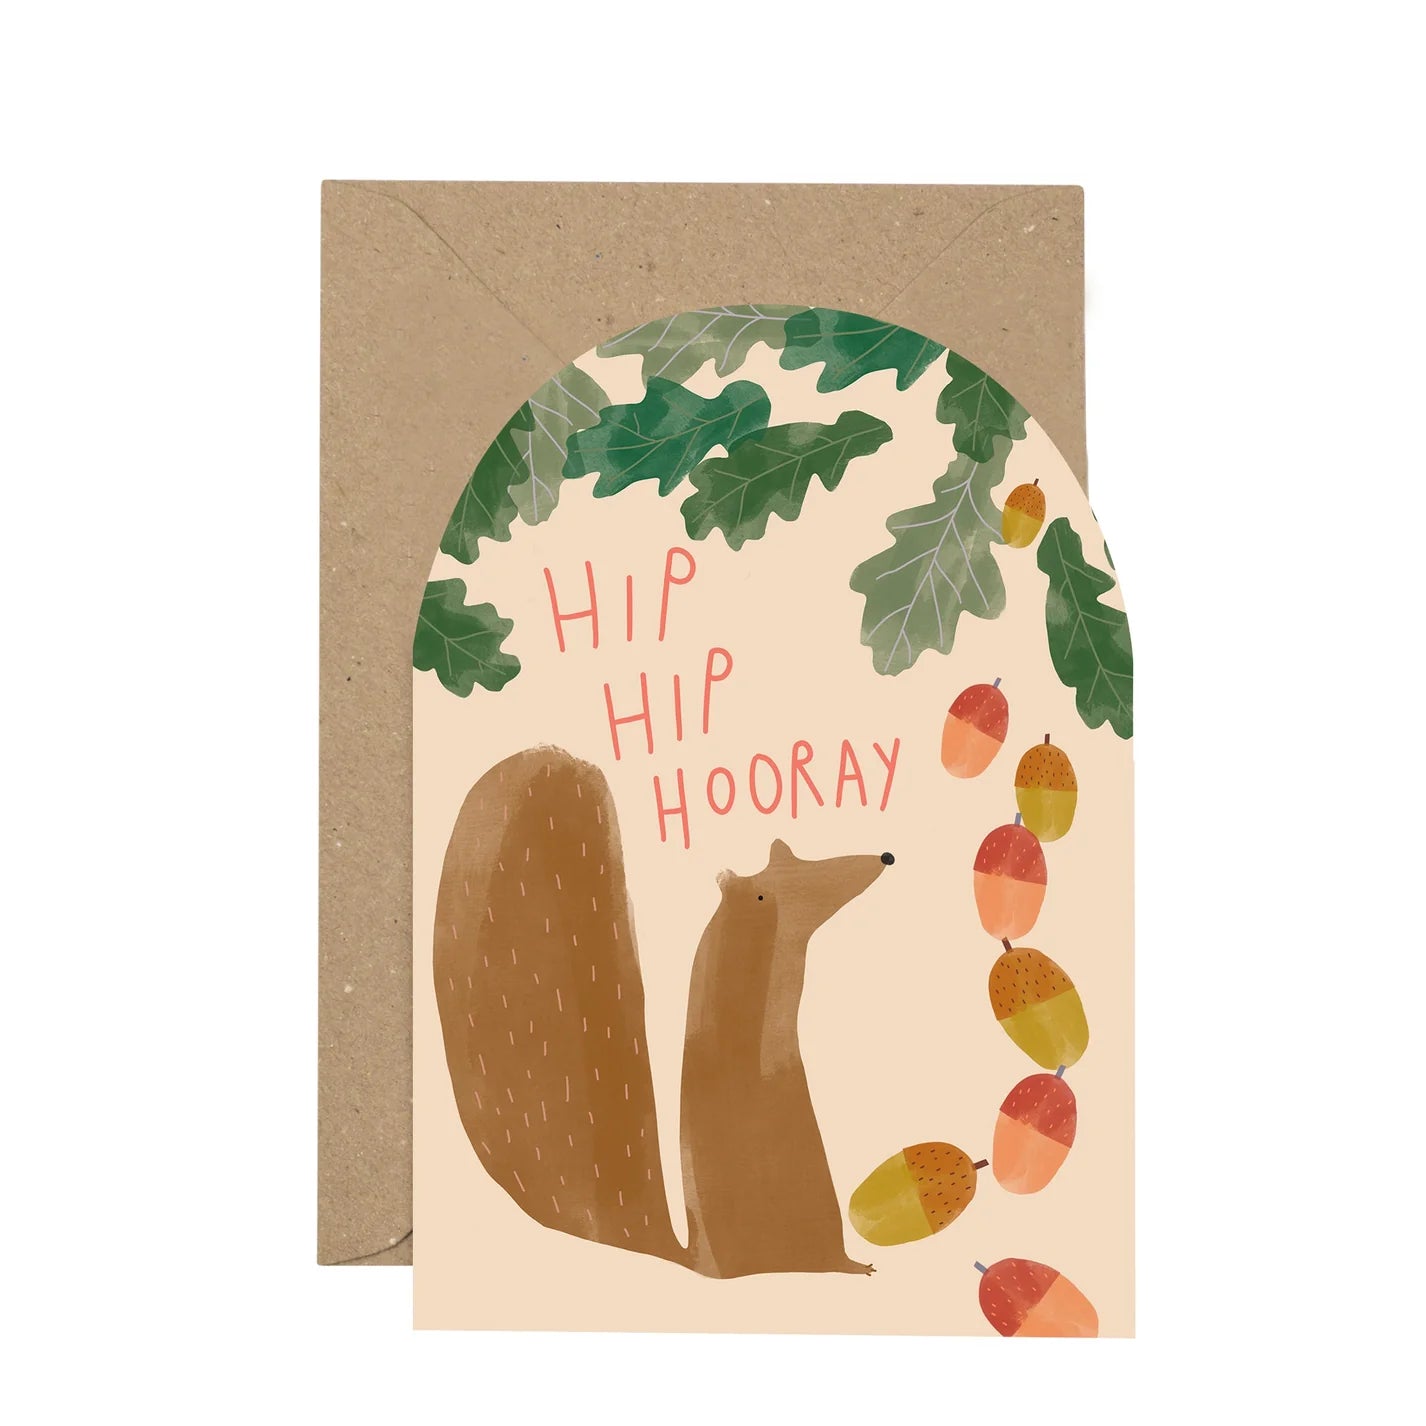 A card and brown envelope against white background. The words Hip Hip Hooray are placed above an illustration of a squirrel under a tree.